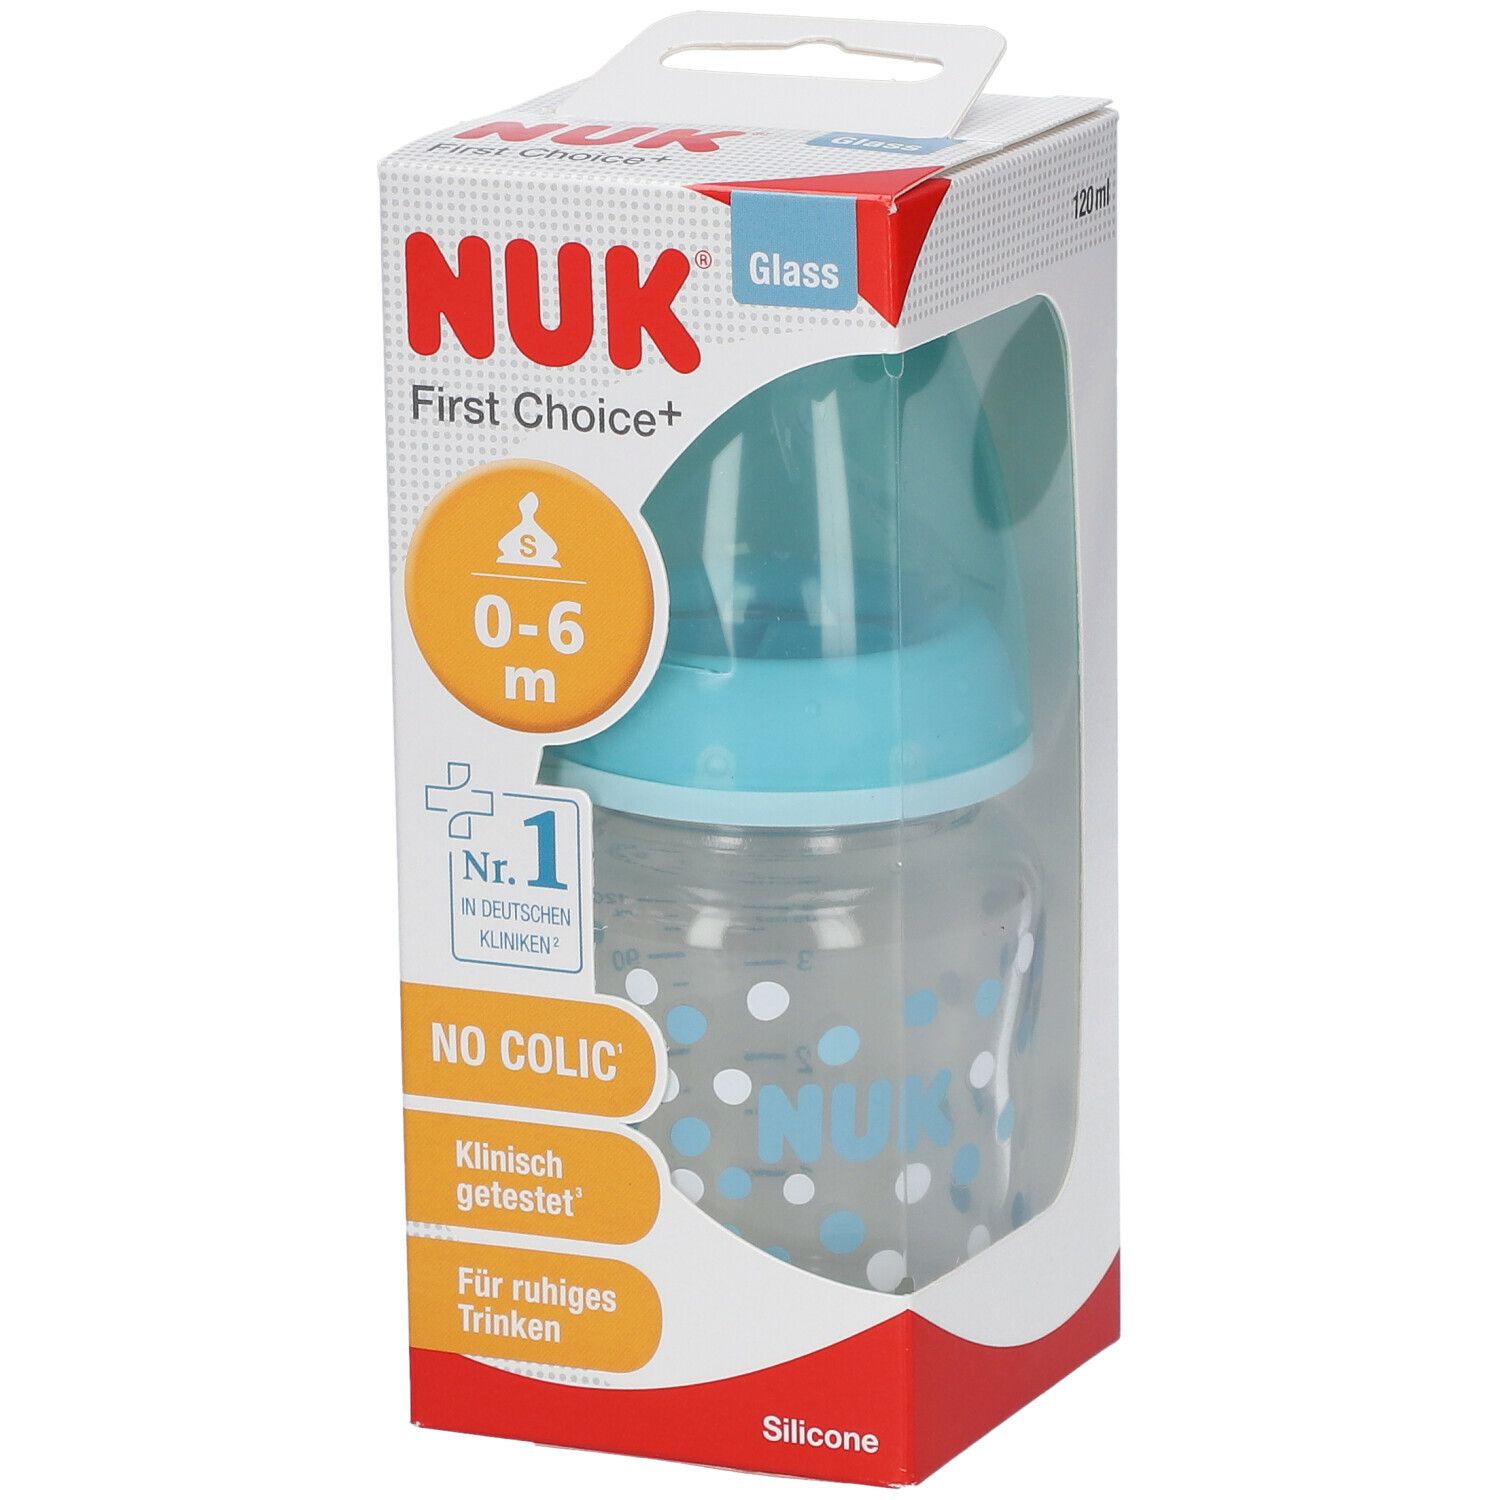 NUK glass bottle first choice plus silicone 120ml - turquoise